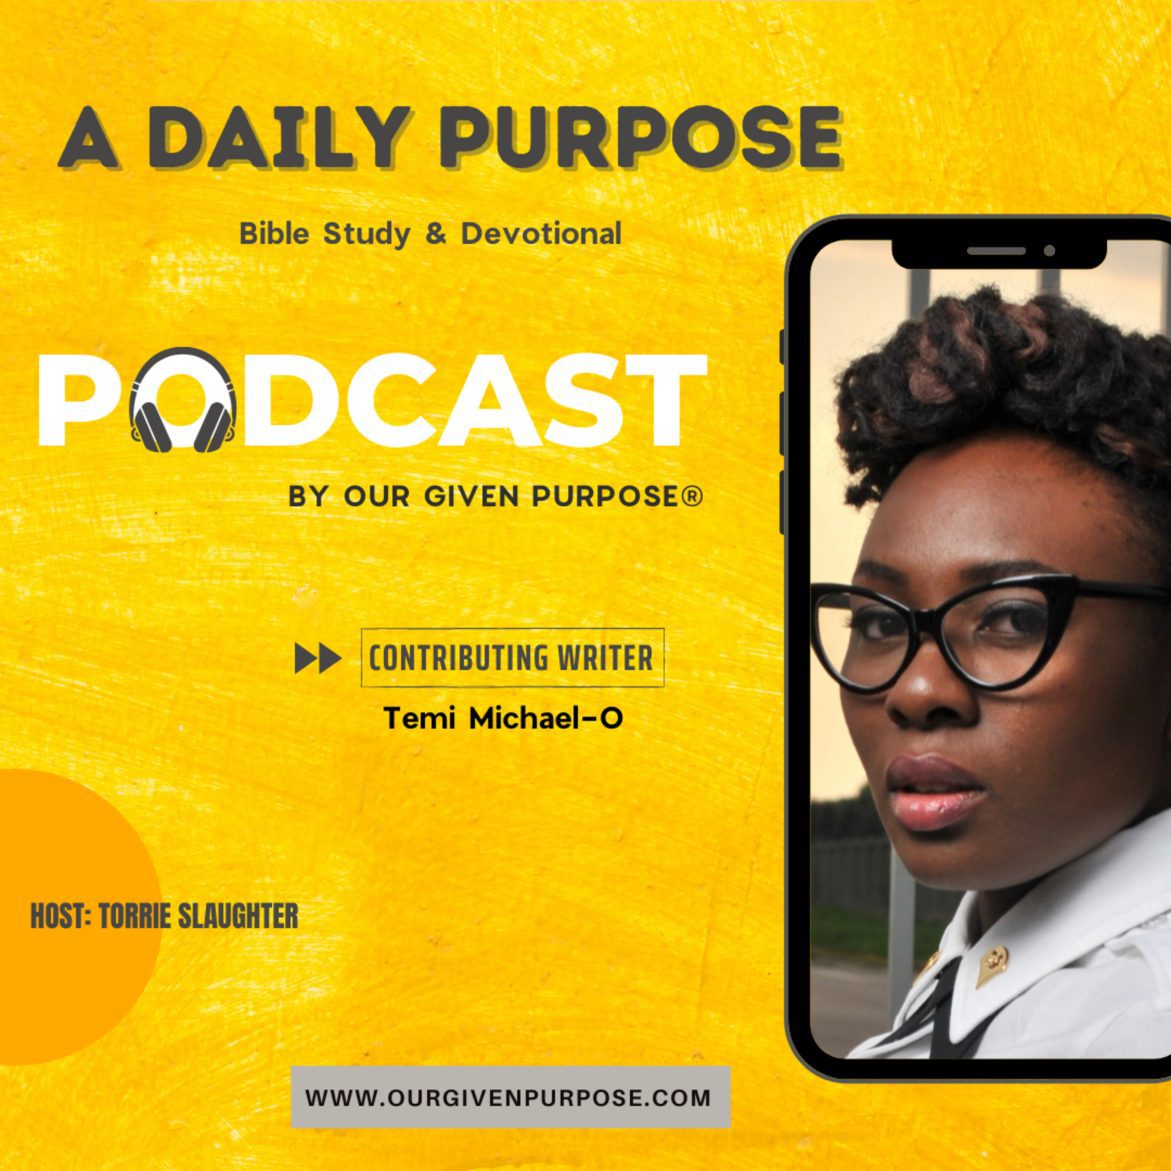 Black Podcasting - Day 69 is Wealth Worthless? by Temi Michael-O